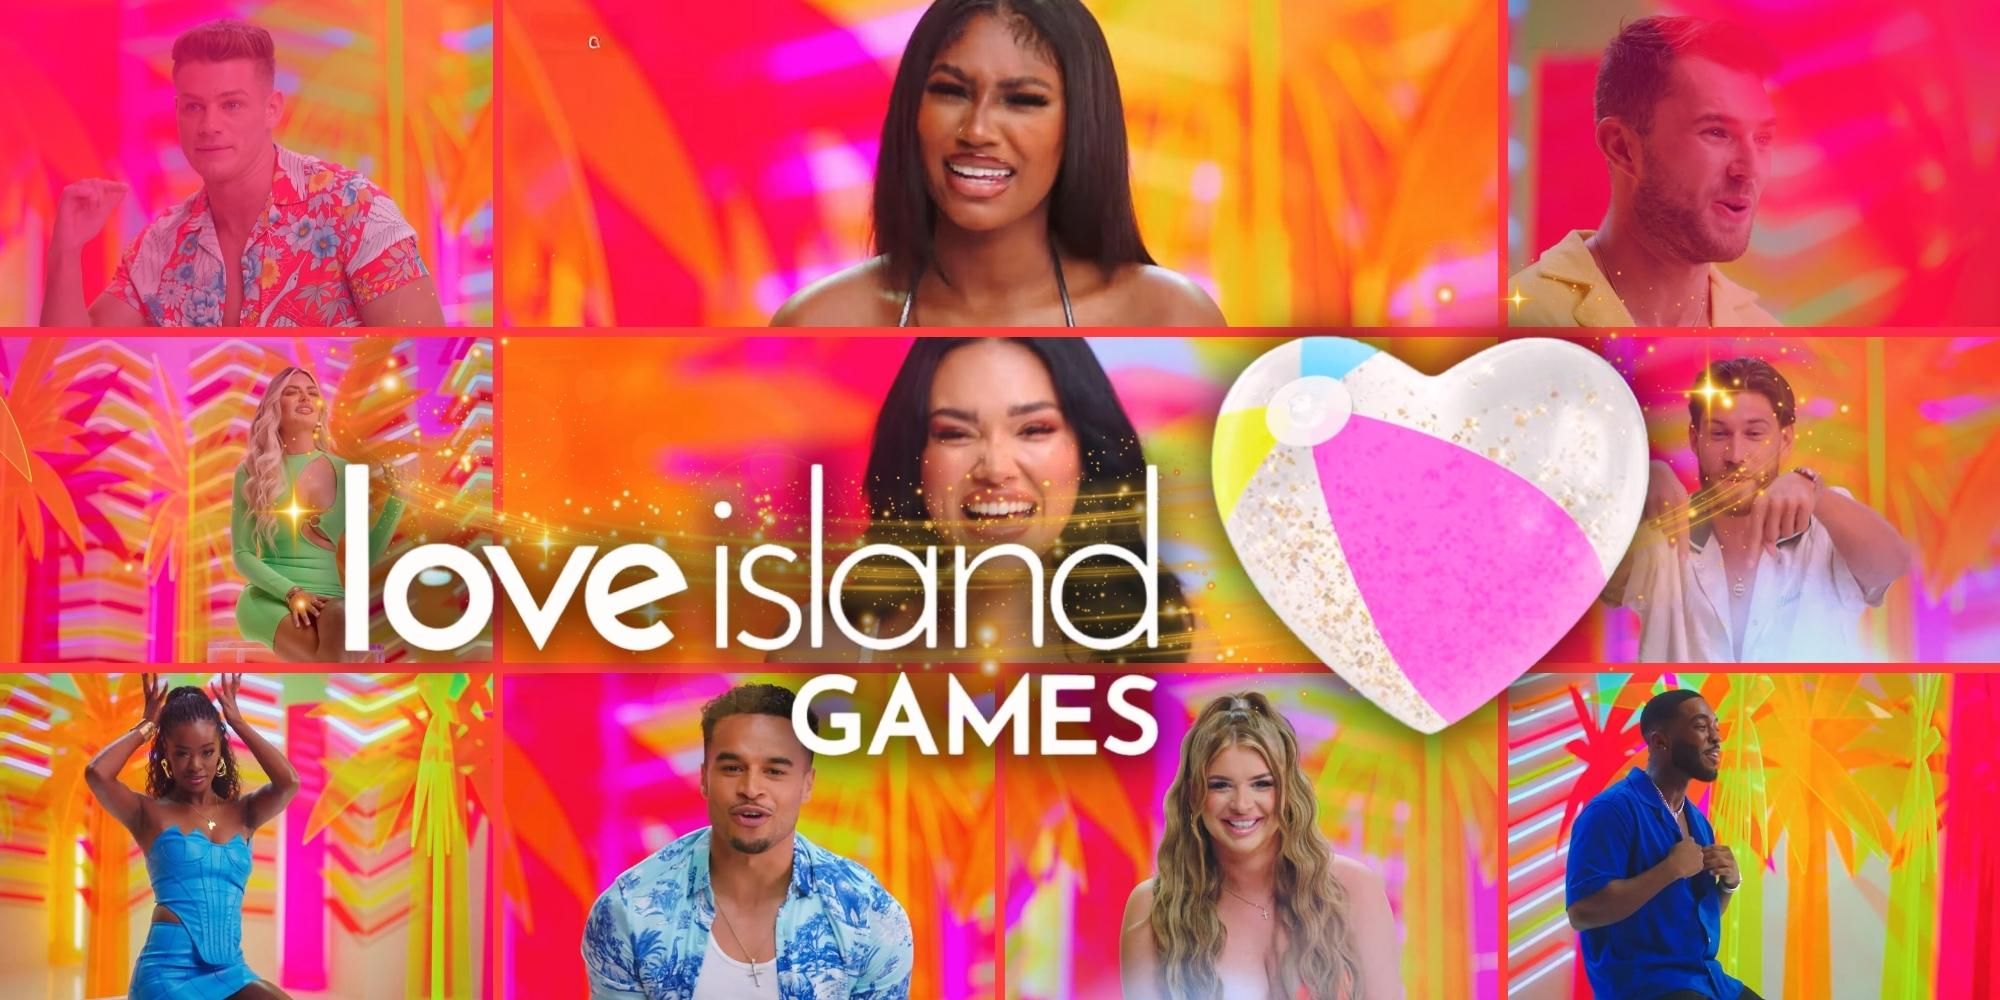 Montage of Love Island Games cast members